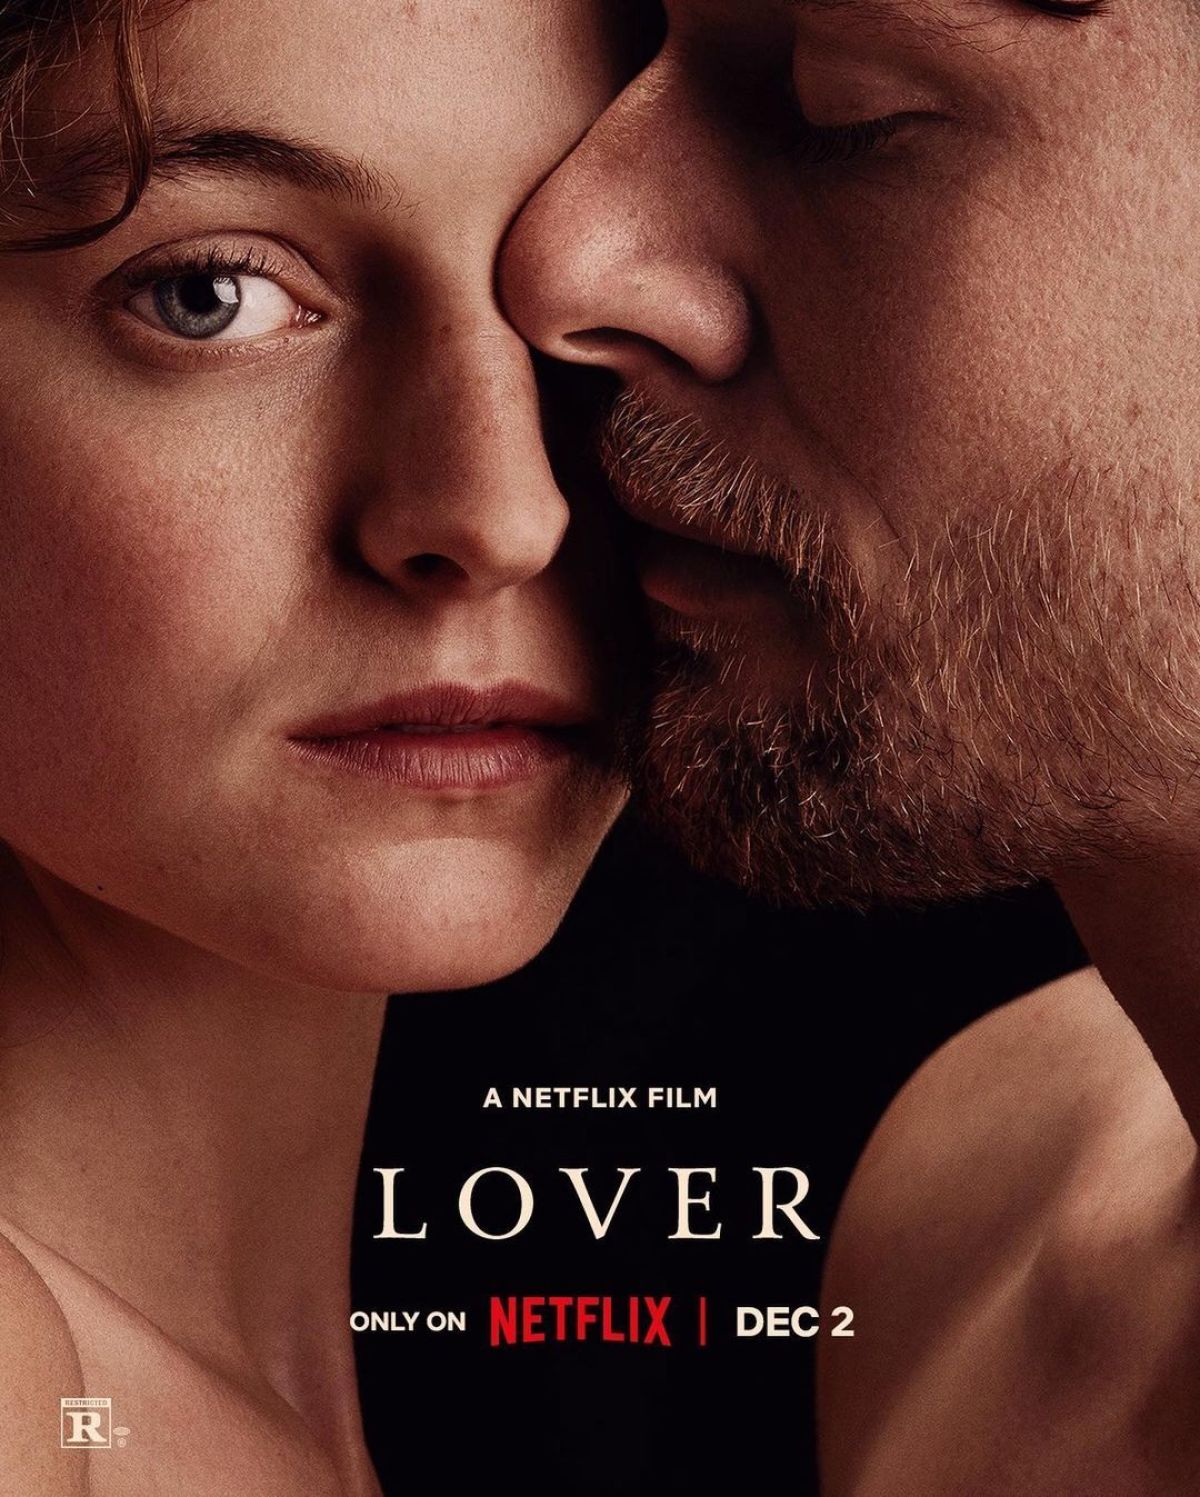 Emma Corrin and Jack O'Connell in a sensual new adaptation of Lady Chatterley's Lover 2022